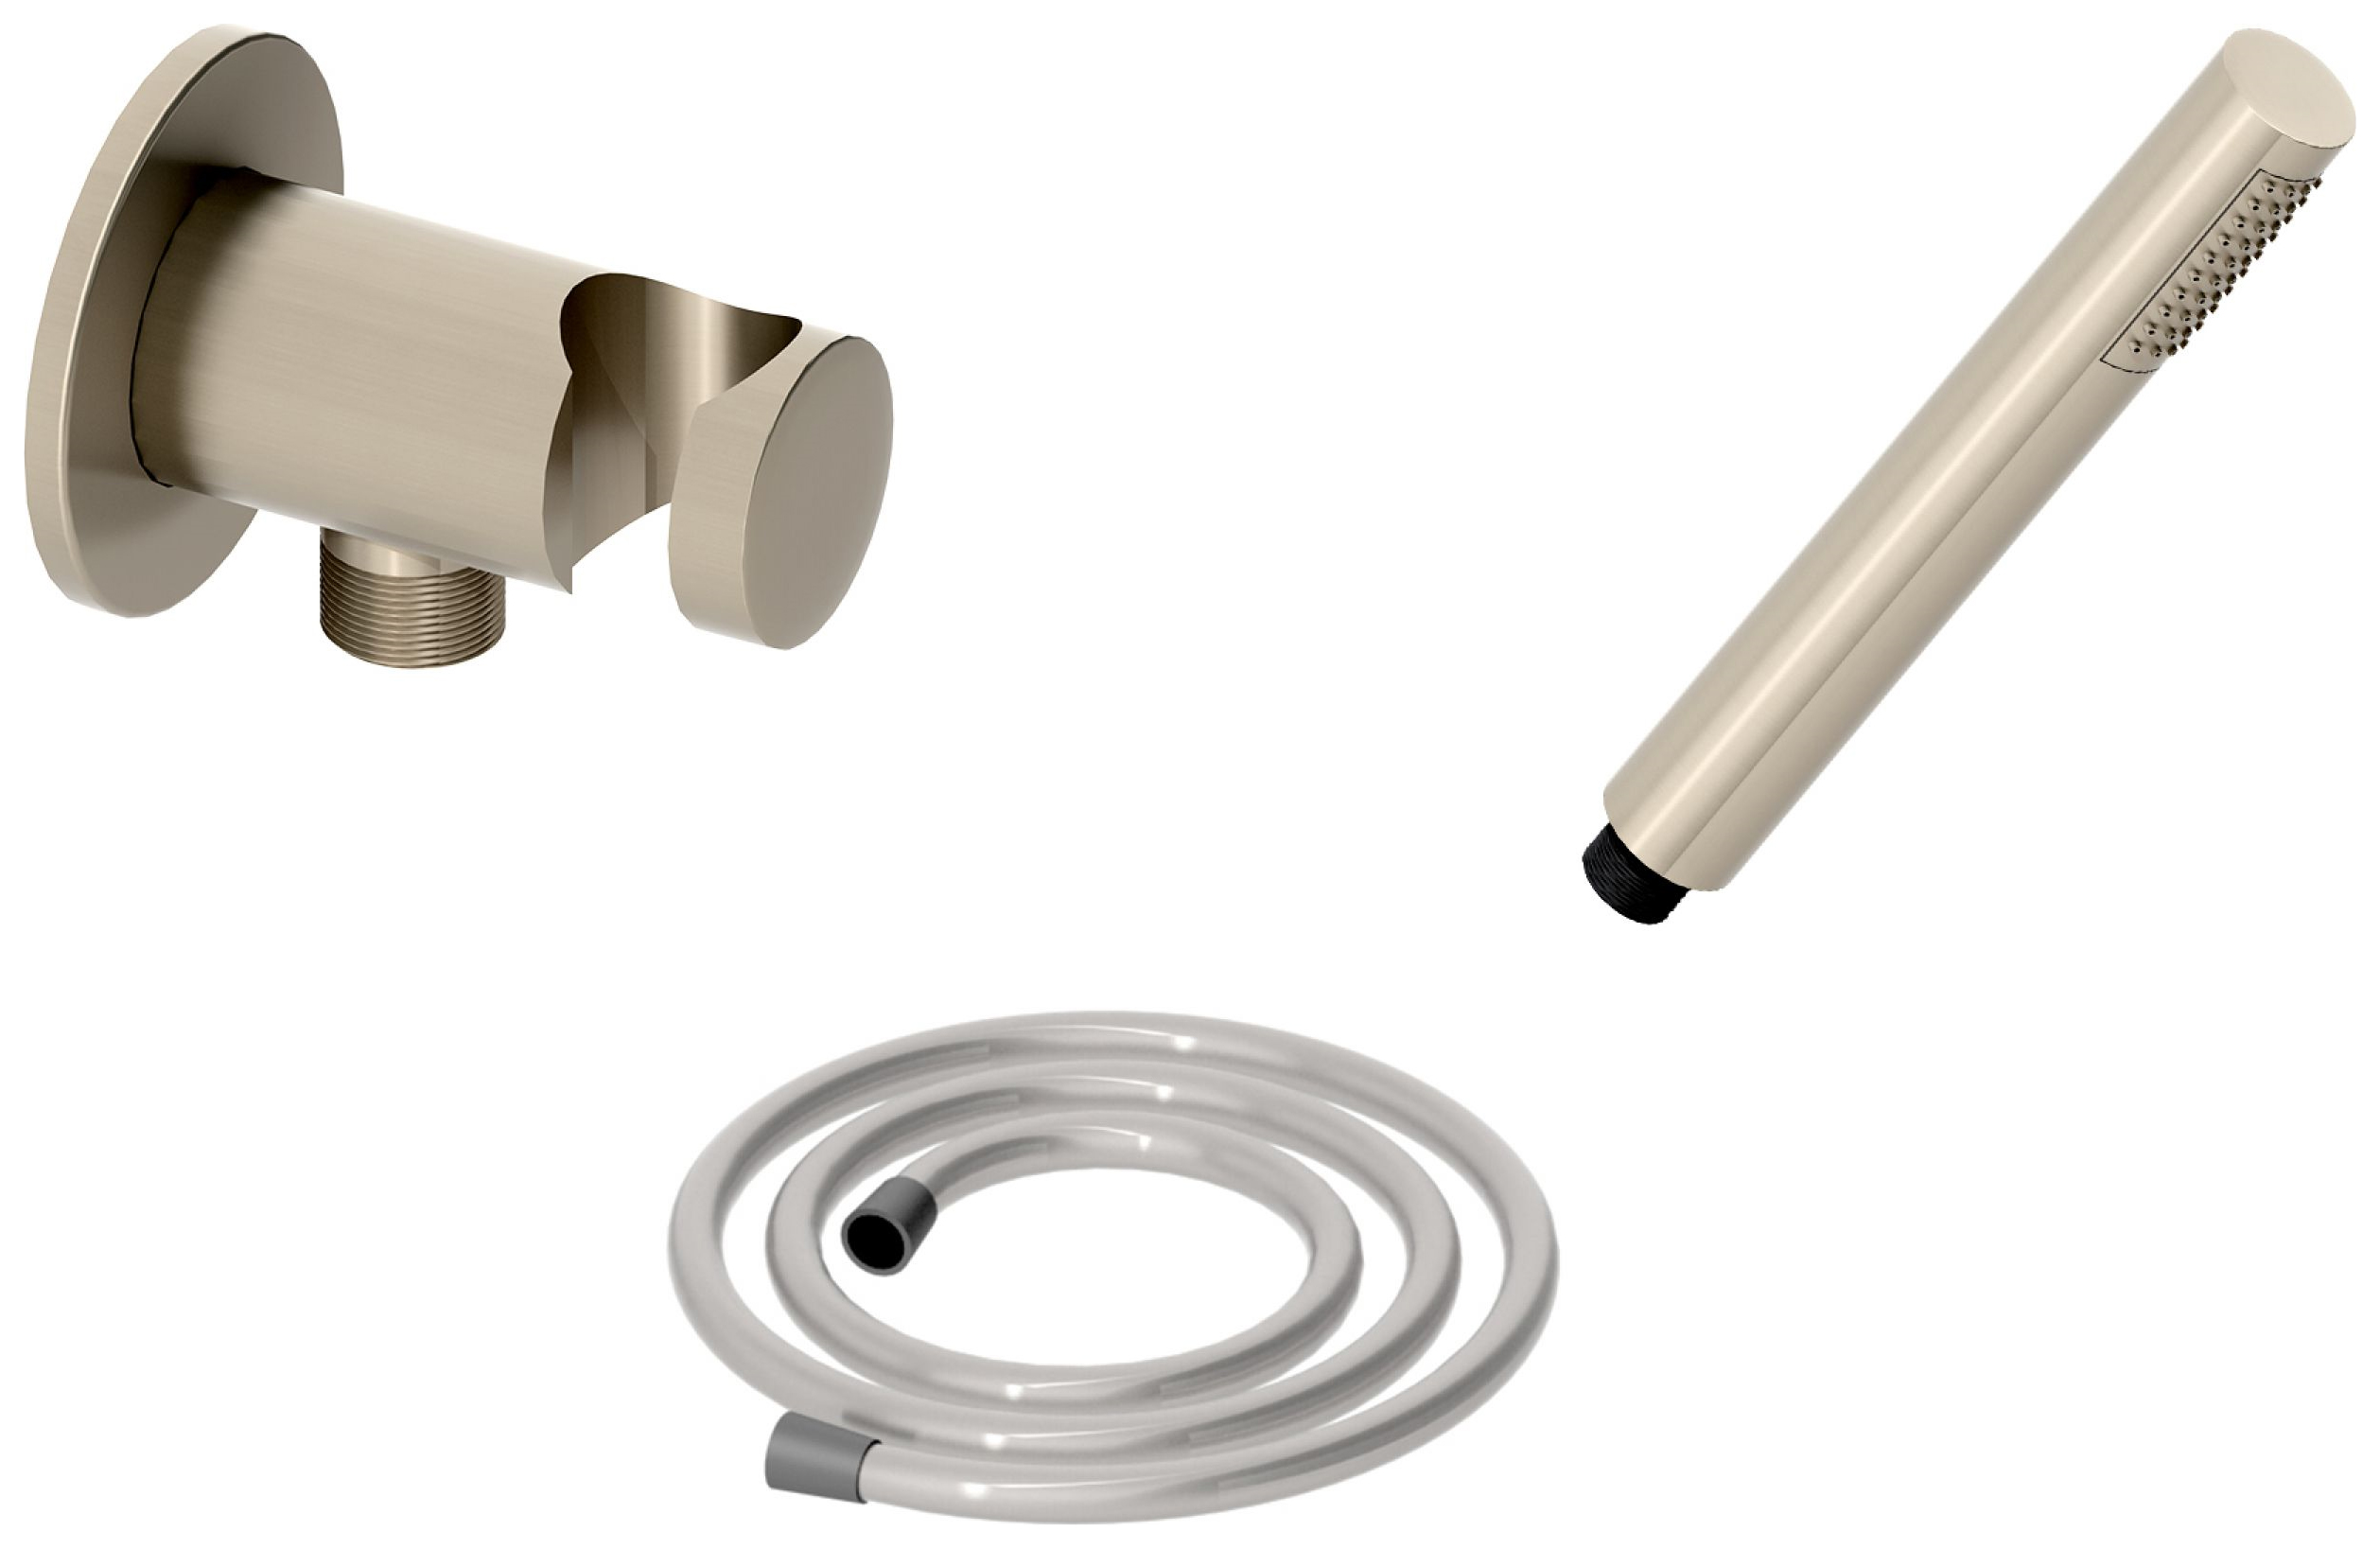 Image of Hadleigh Shower Wall Outlet & Holder, 1.25m Hose & Handset Accessories Kit in Brushed Nickel